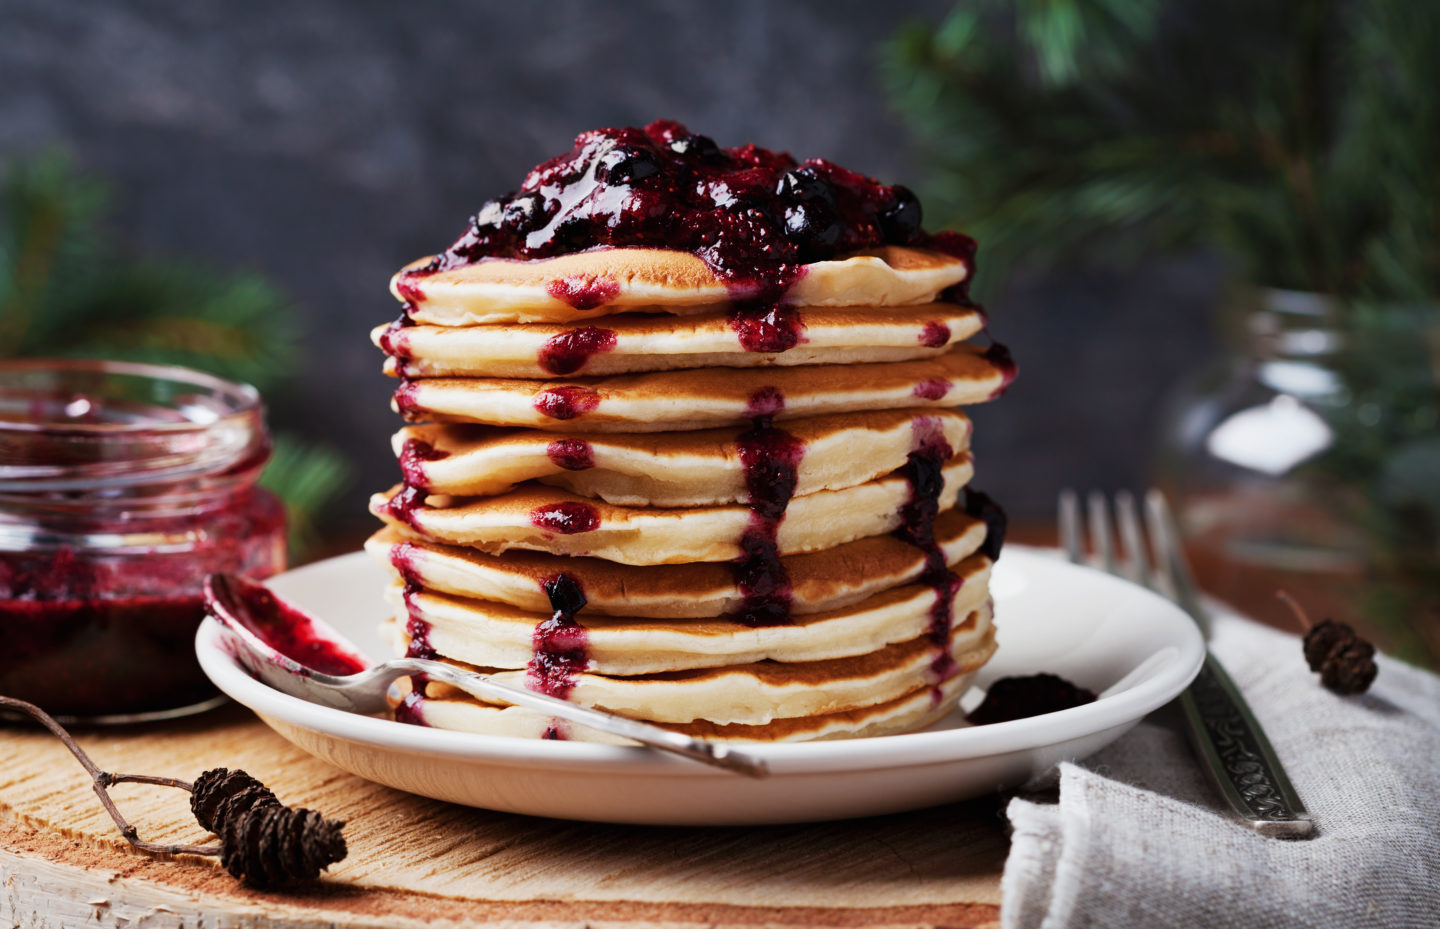 Stack of american pancakes or fritters with strawberry and blueberry jam in white plate on wooden rustic table decorated Christmas tree, delicious dessert for breakfast in winter, vintage style